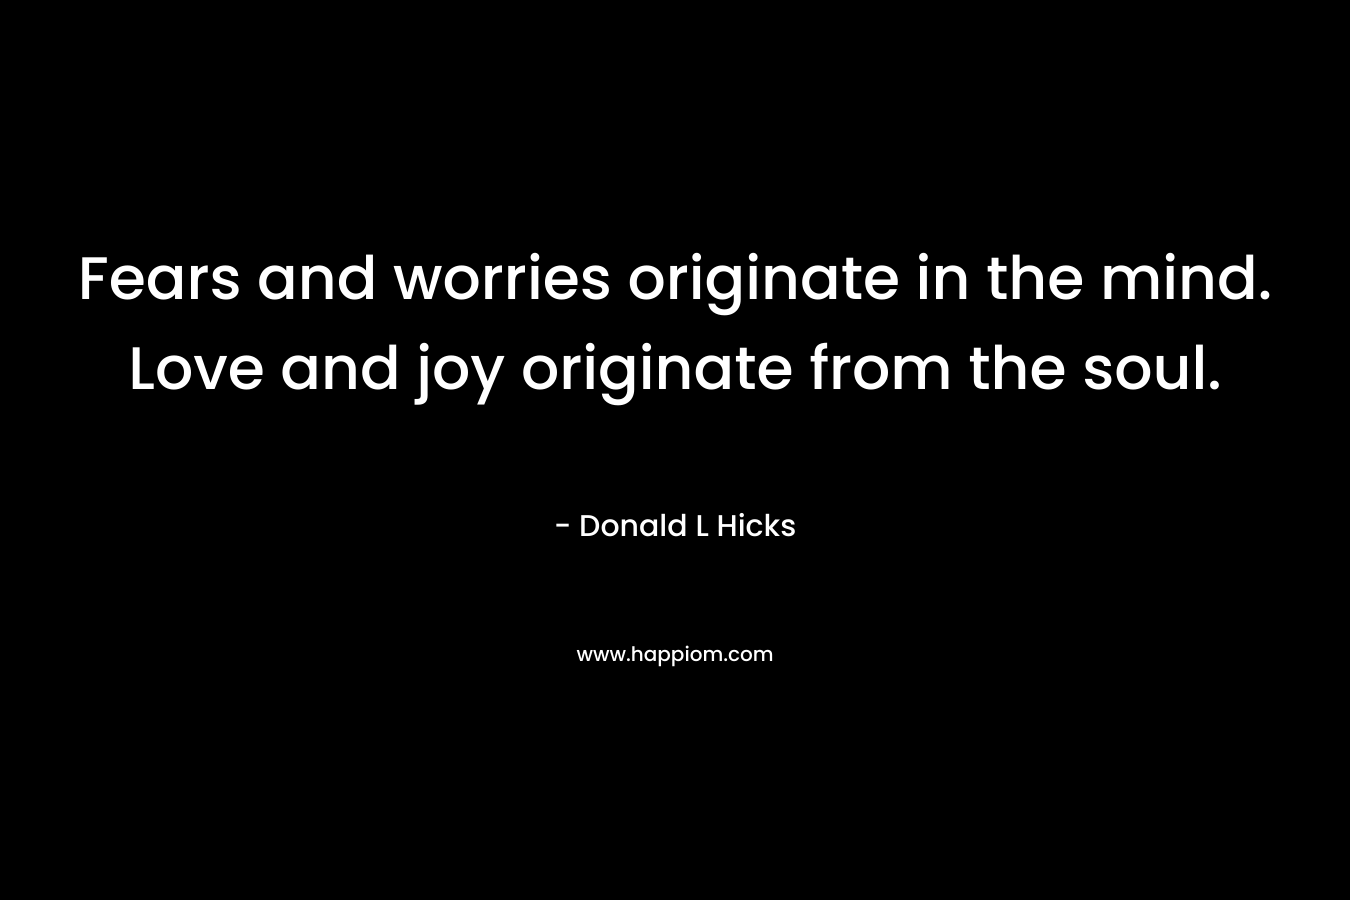 Fears and worries originate in the mind. Love and joy originate from the soul. – Donald L Hicks